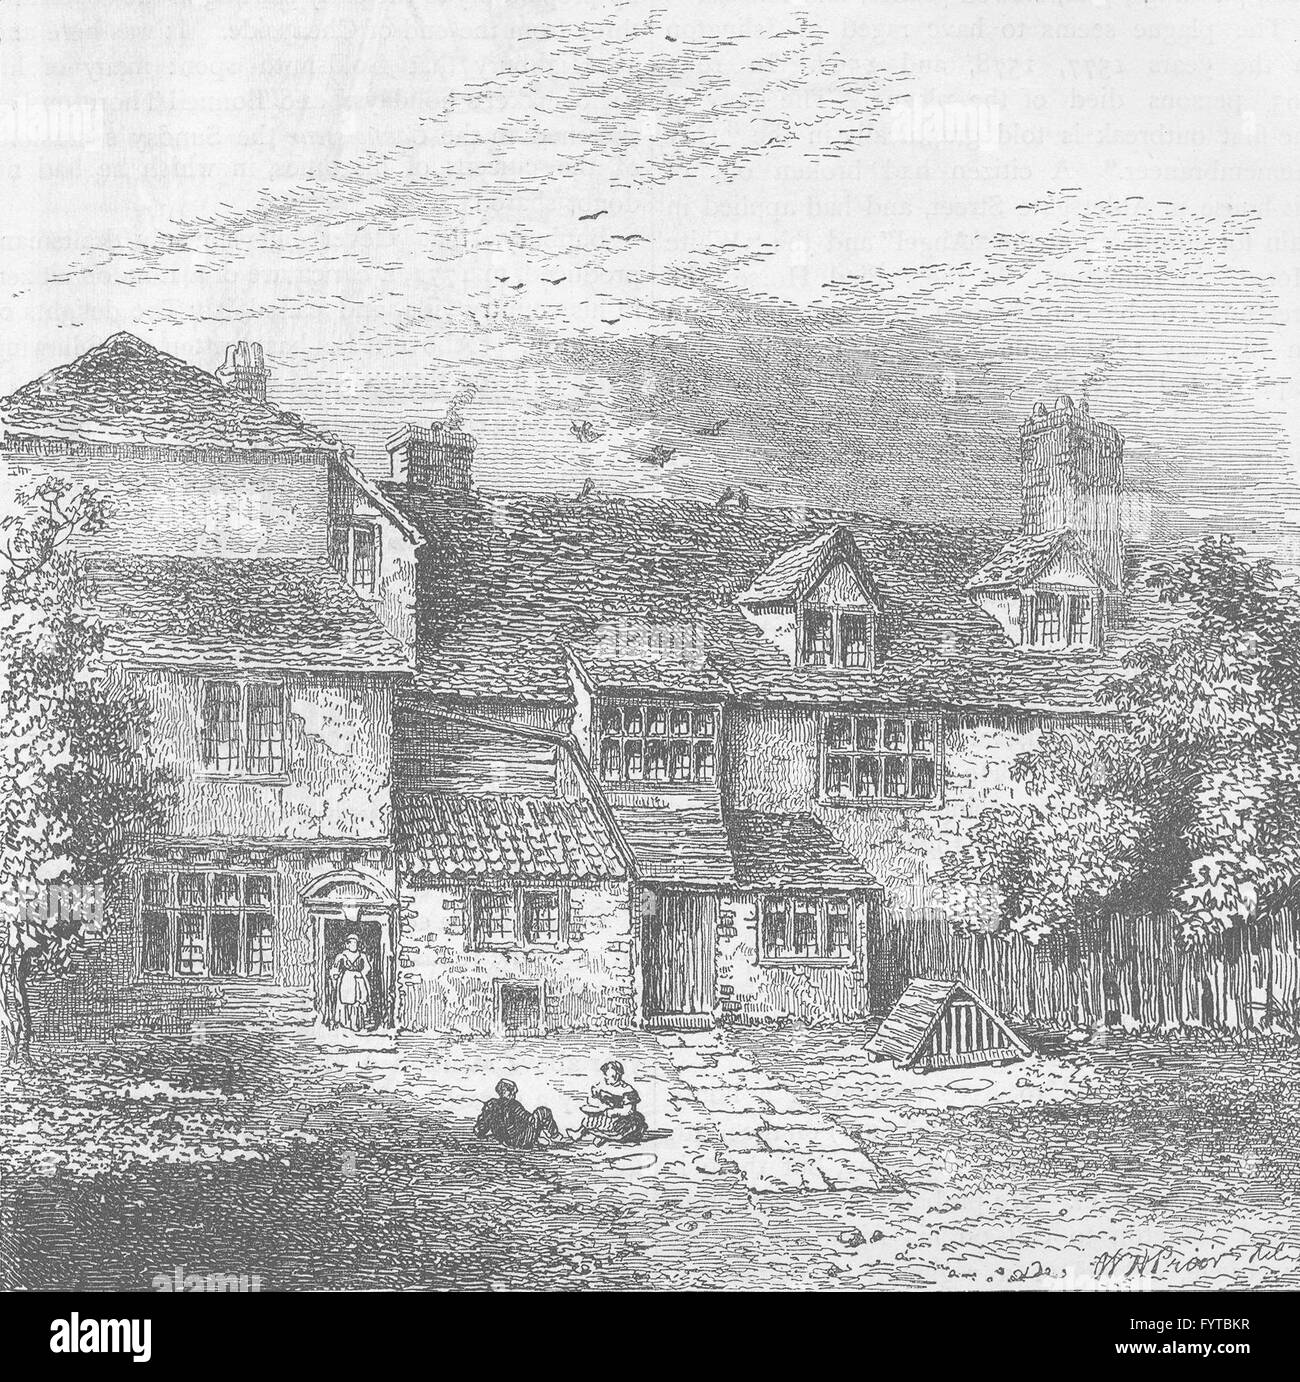 ISLINGTON : Sir Walter Raleigh's House. Londres, antique print c1880 Banque D'Images